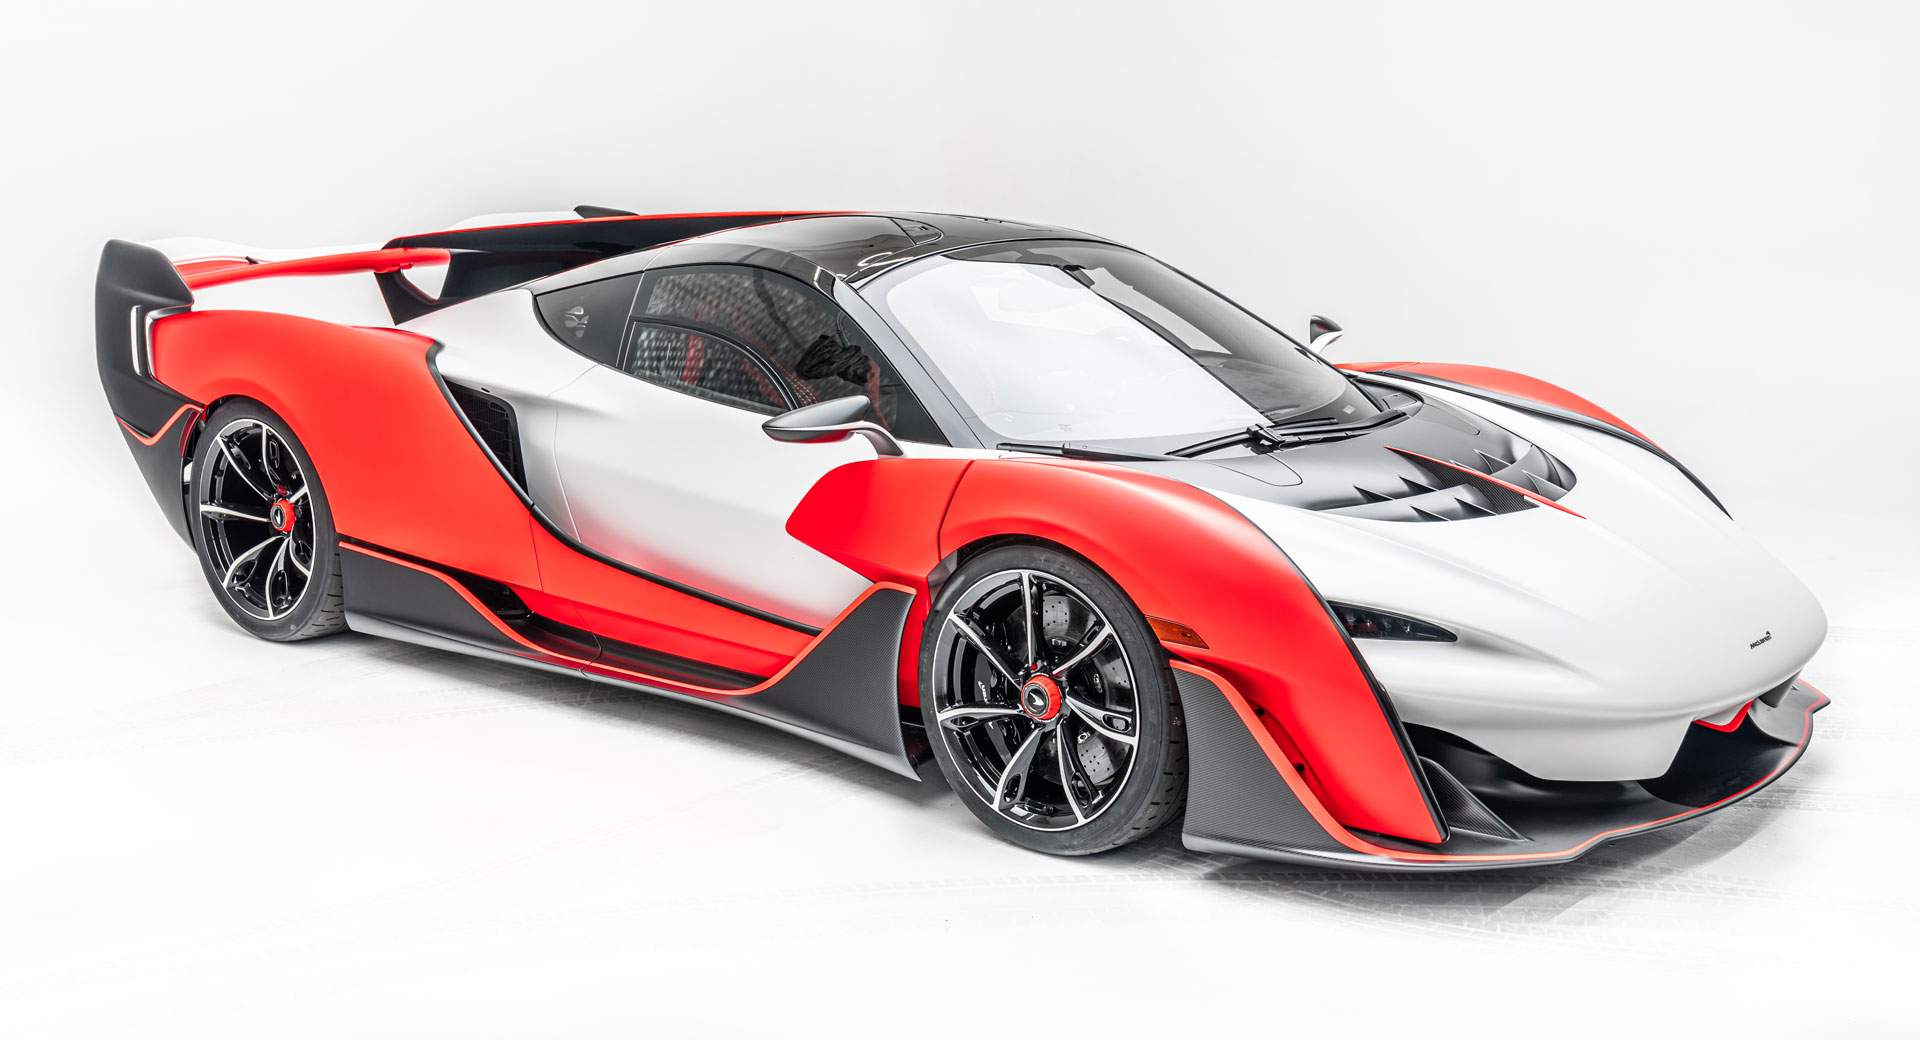 tro Betjening mulig Himmel McLaren Sabre Debuts With 824 HP And 218 MPH Top Speed | Carscoops